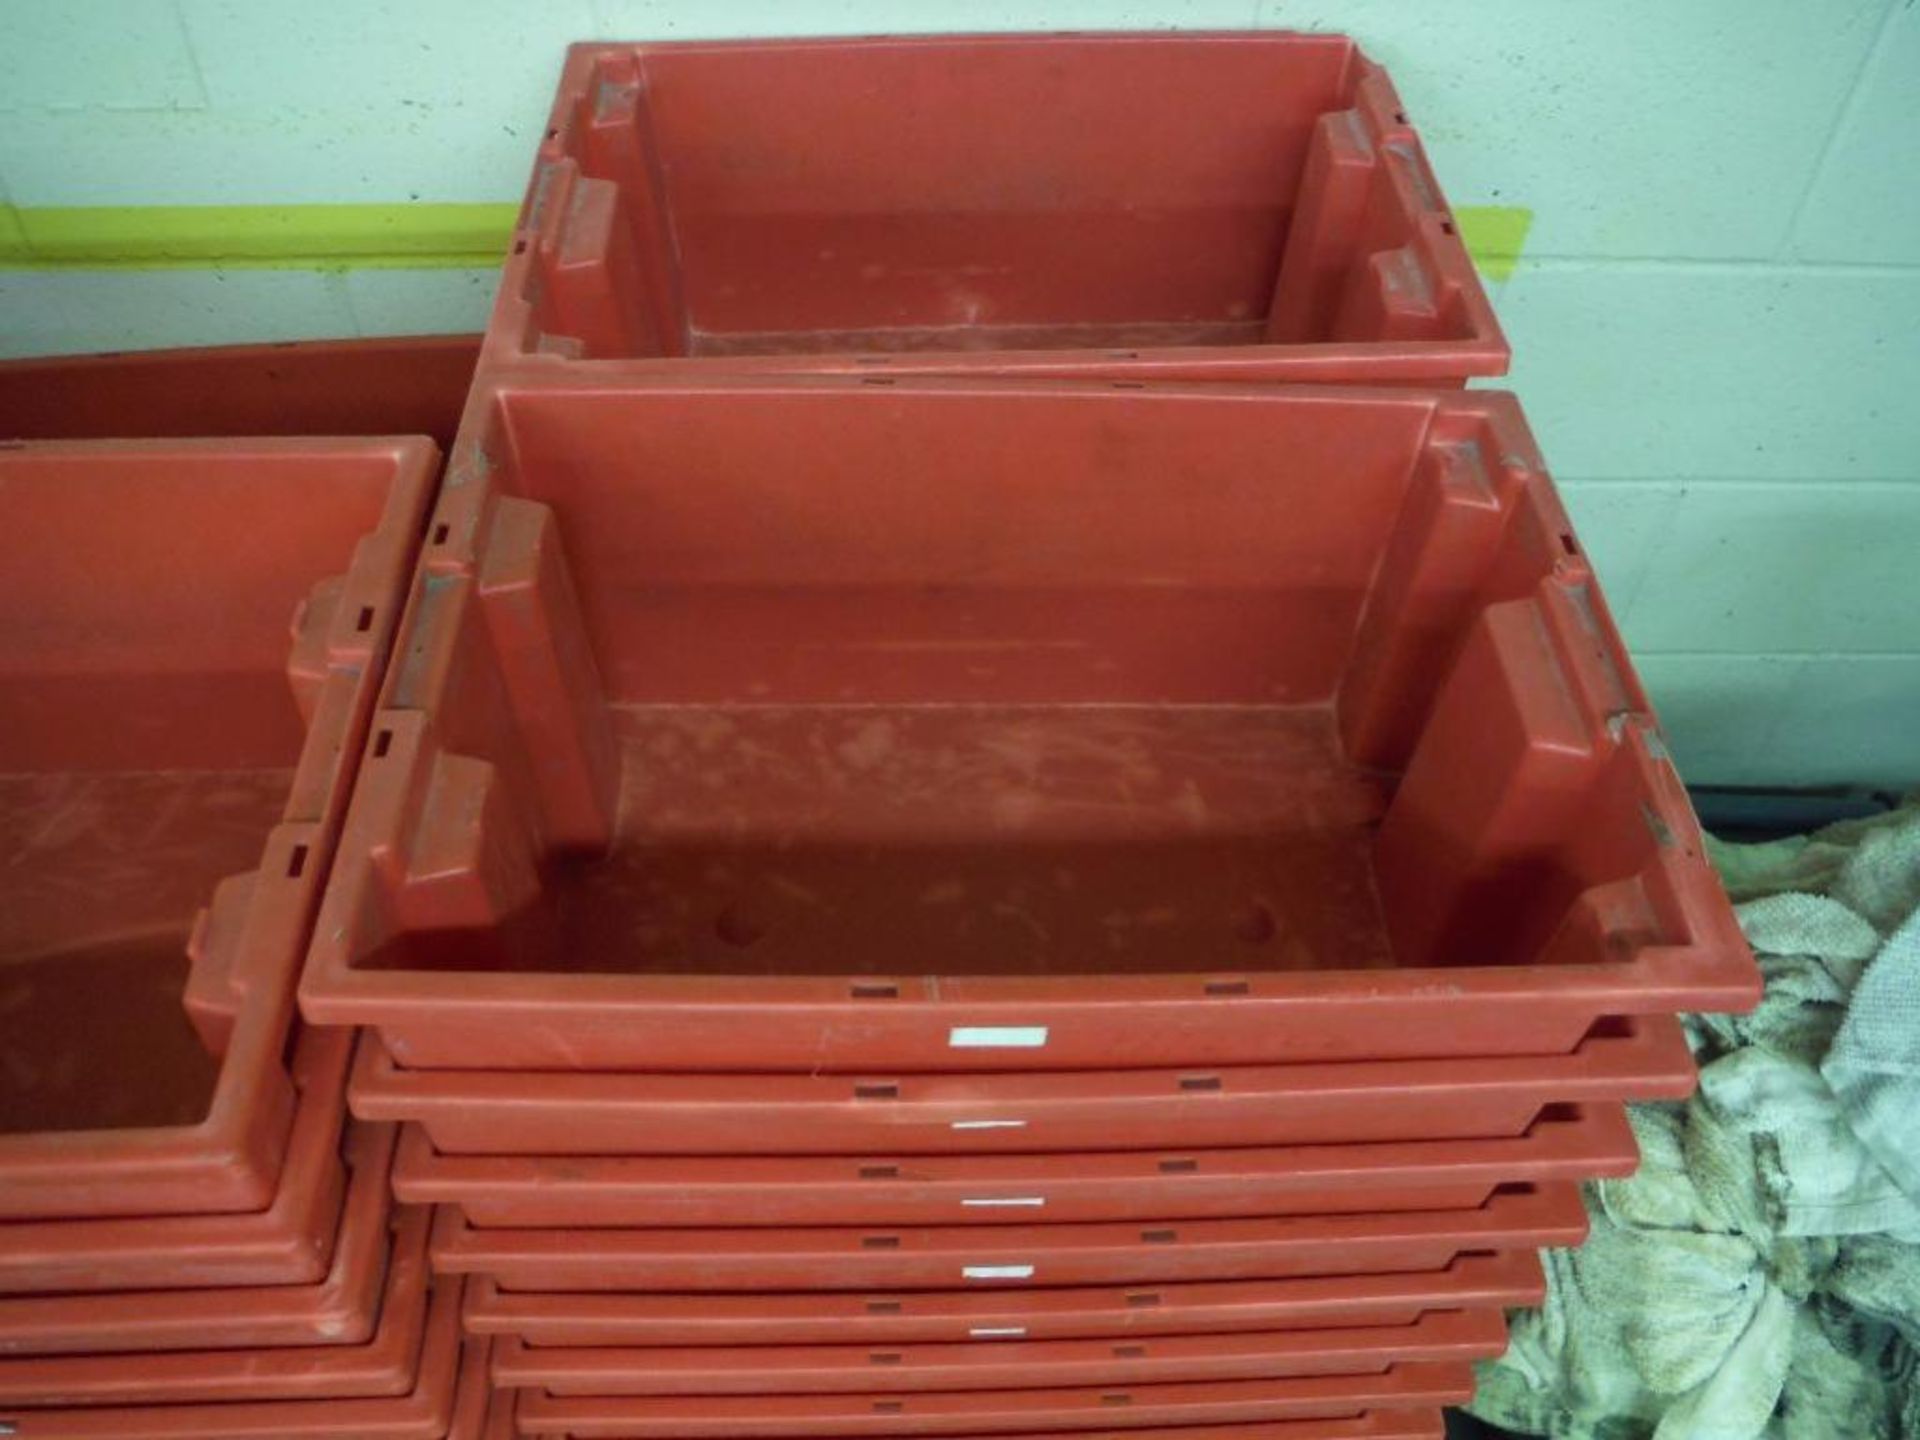 Approx. 140 stackable poly tubs, 19 in. long x 14 in. wide x 8 in. tall ** Rigging Fee: $50 ** - Image 2 of 4